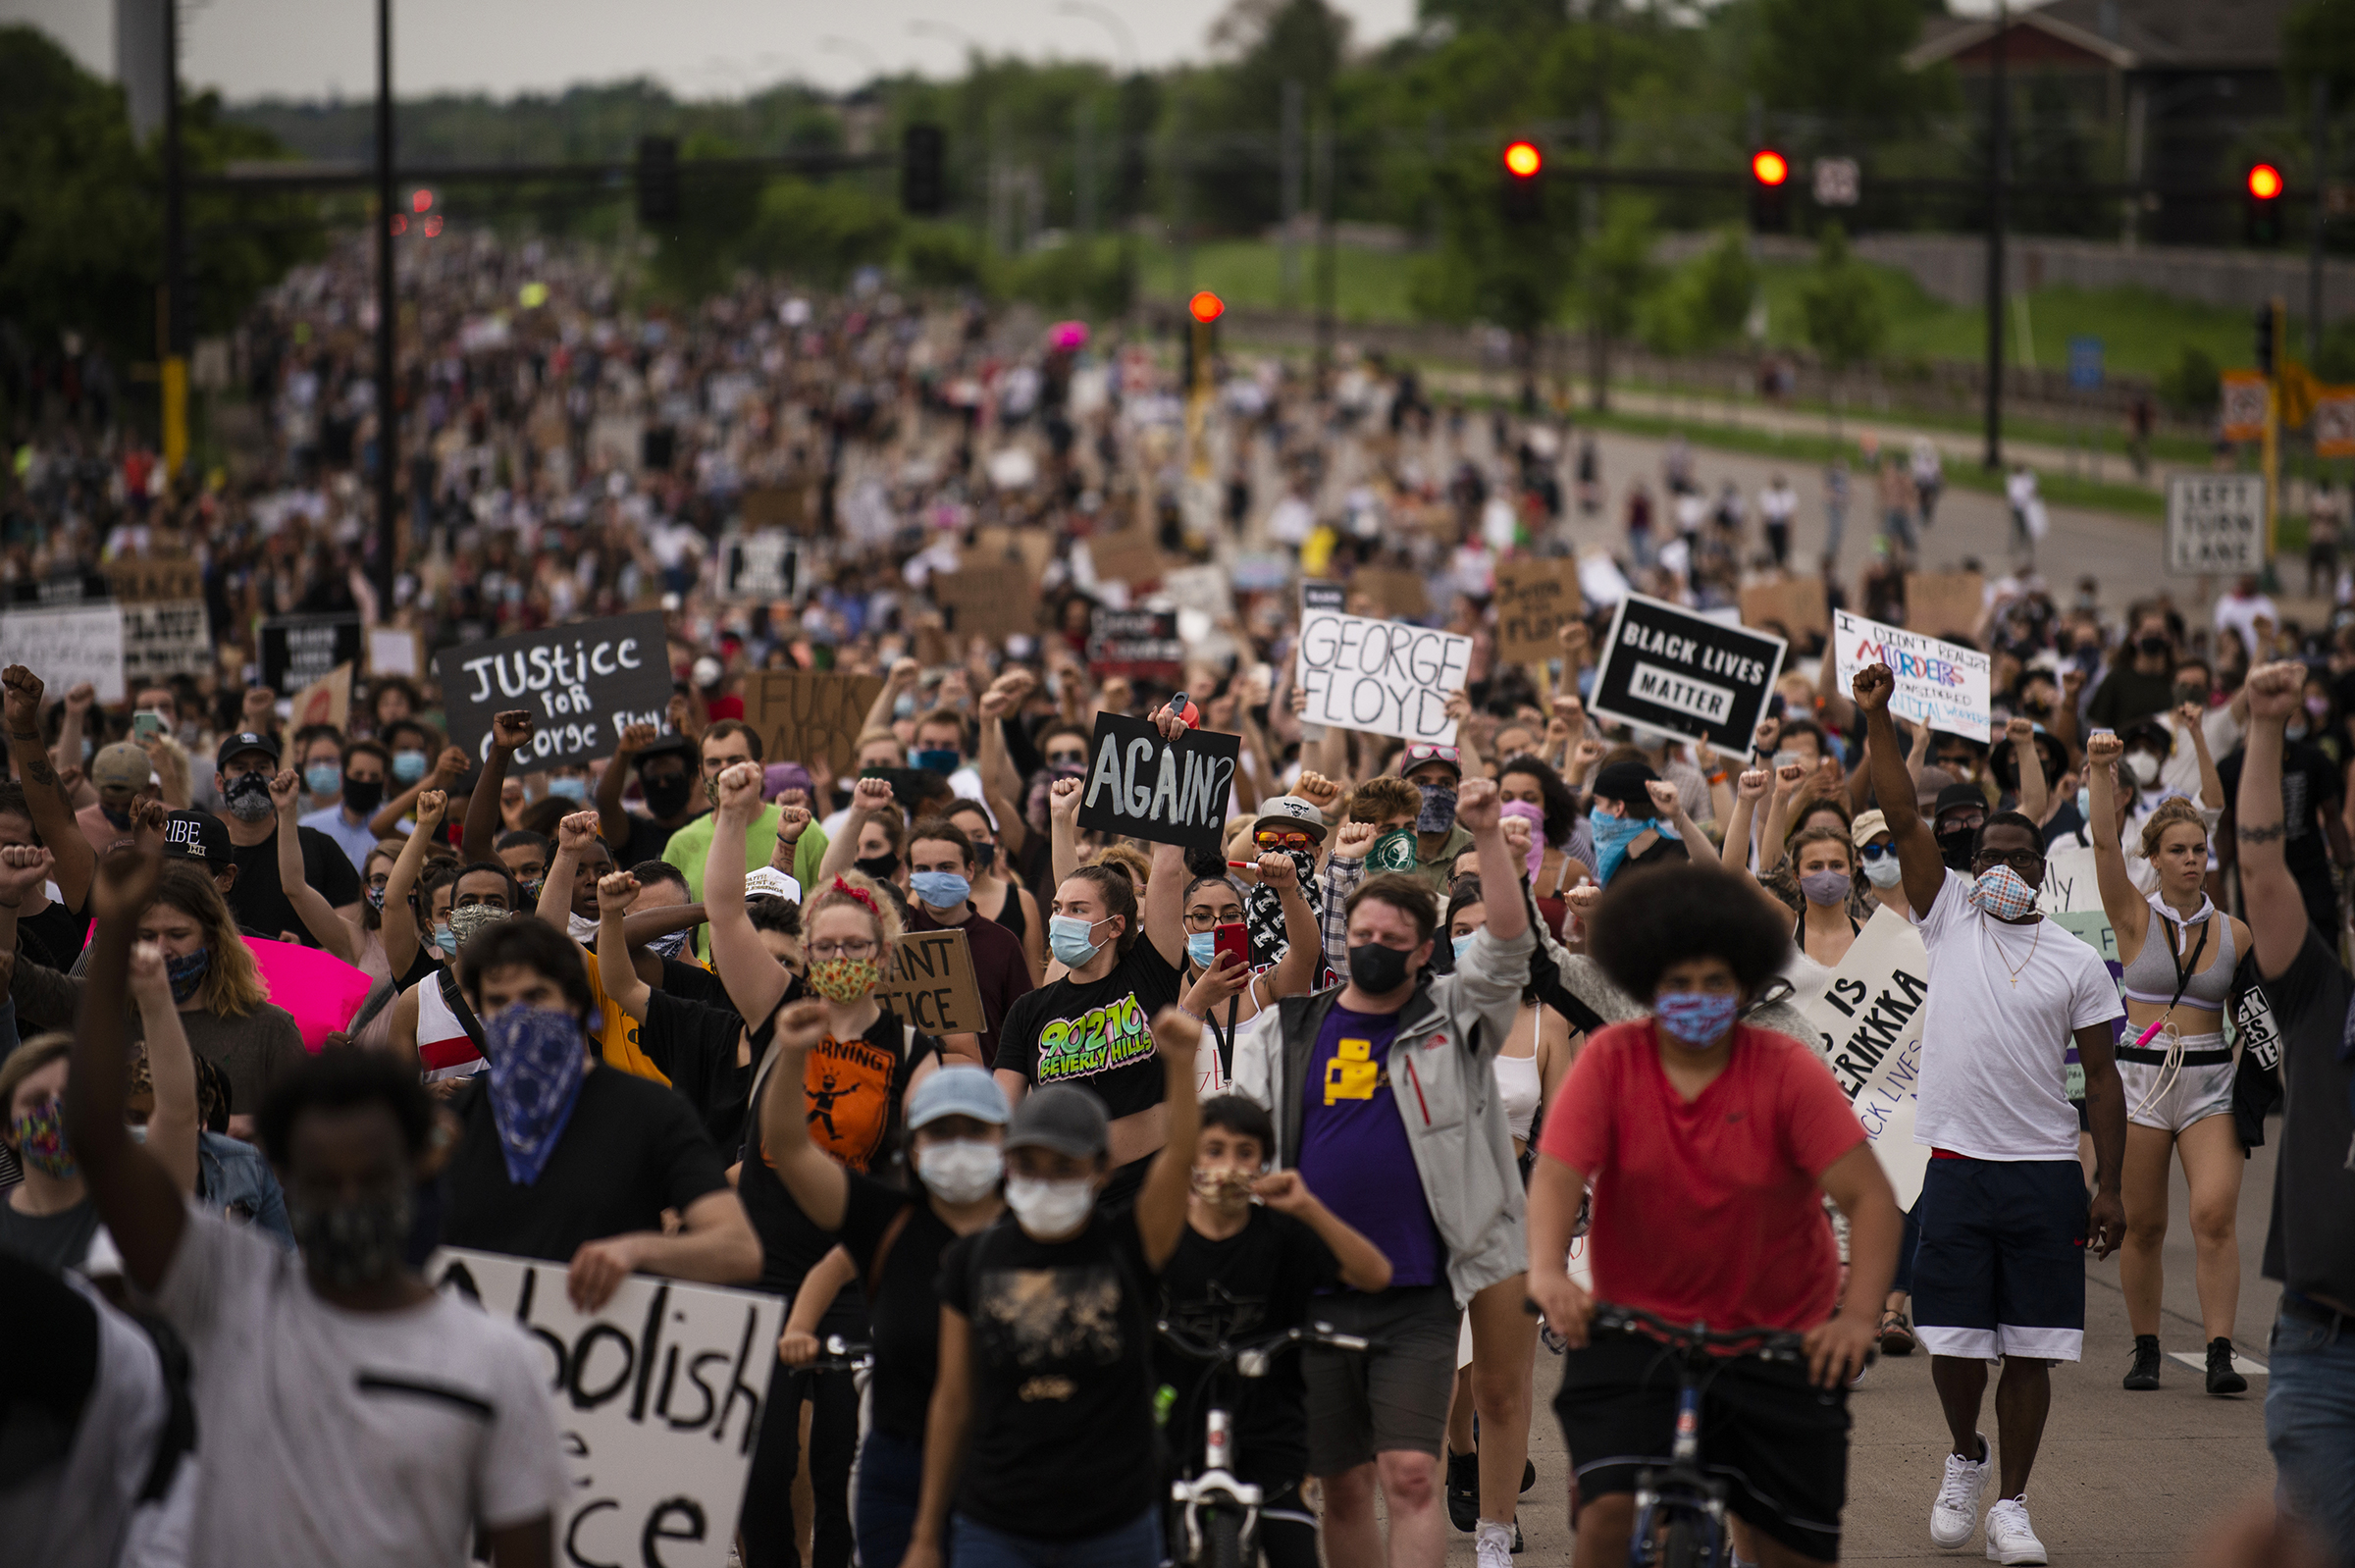 Protesters decrying the killing of George Floyd march on Hiawatha Avenue in Minneapolis on May 26, 2020.